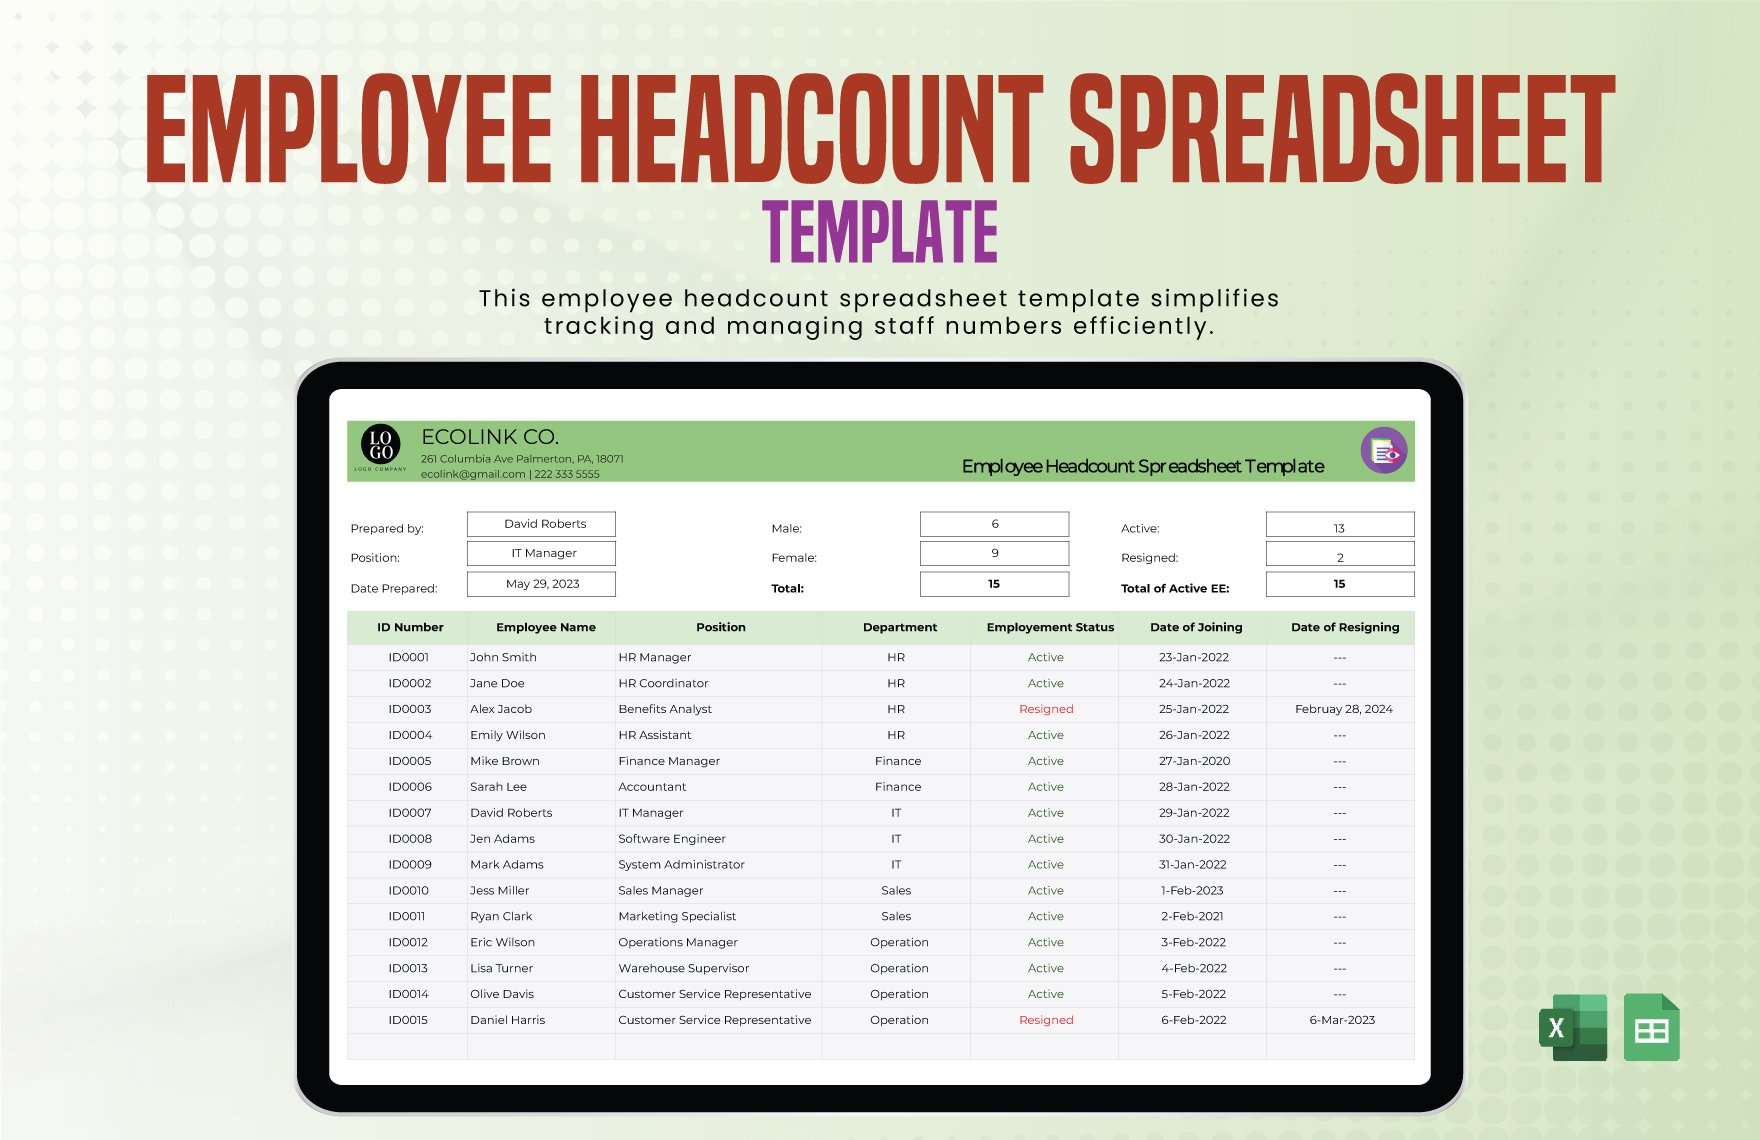 Free Employee Headcount Spreadsheet Template in Excel, Google Sheets